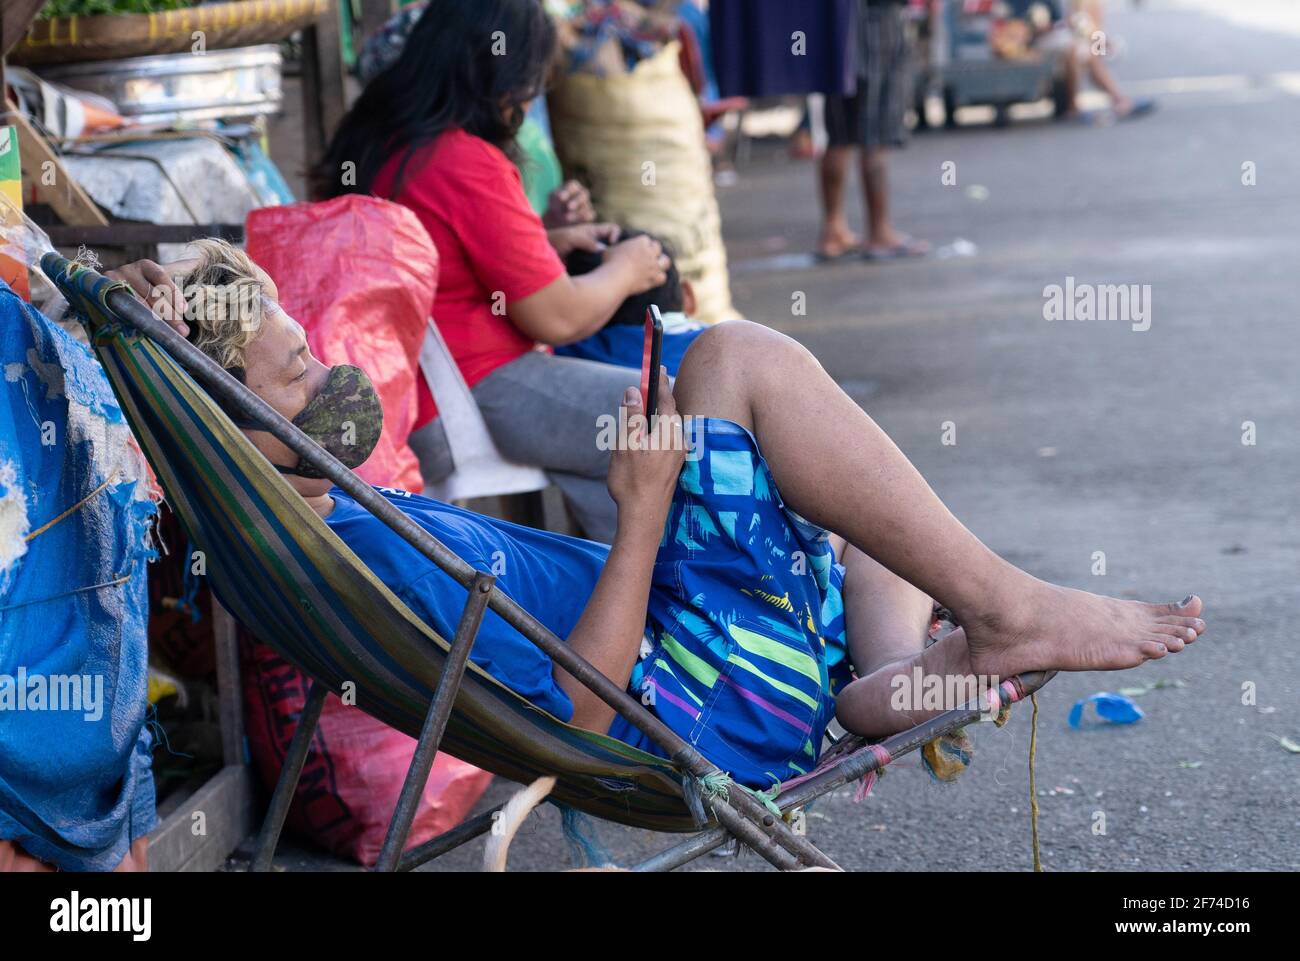 A man sitting in a chair using a mobile phone, Carbon Market, Cebu City, Philippines Stock Photo